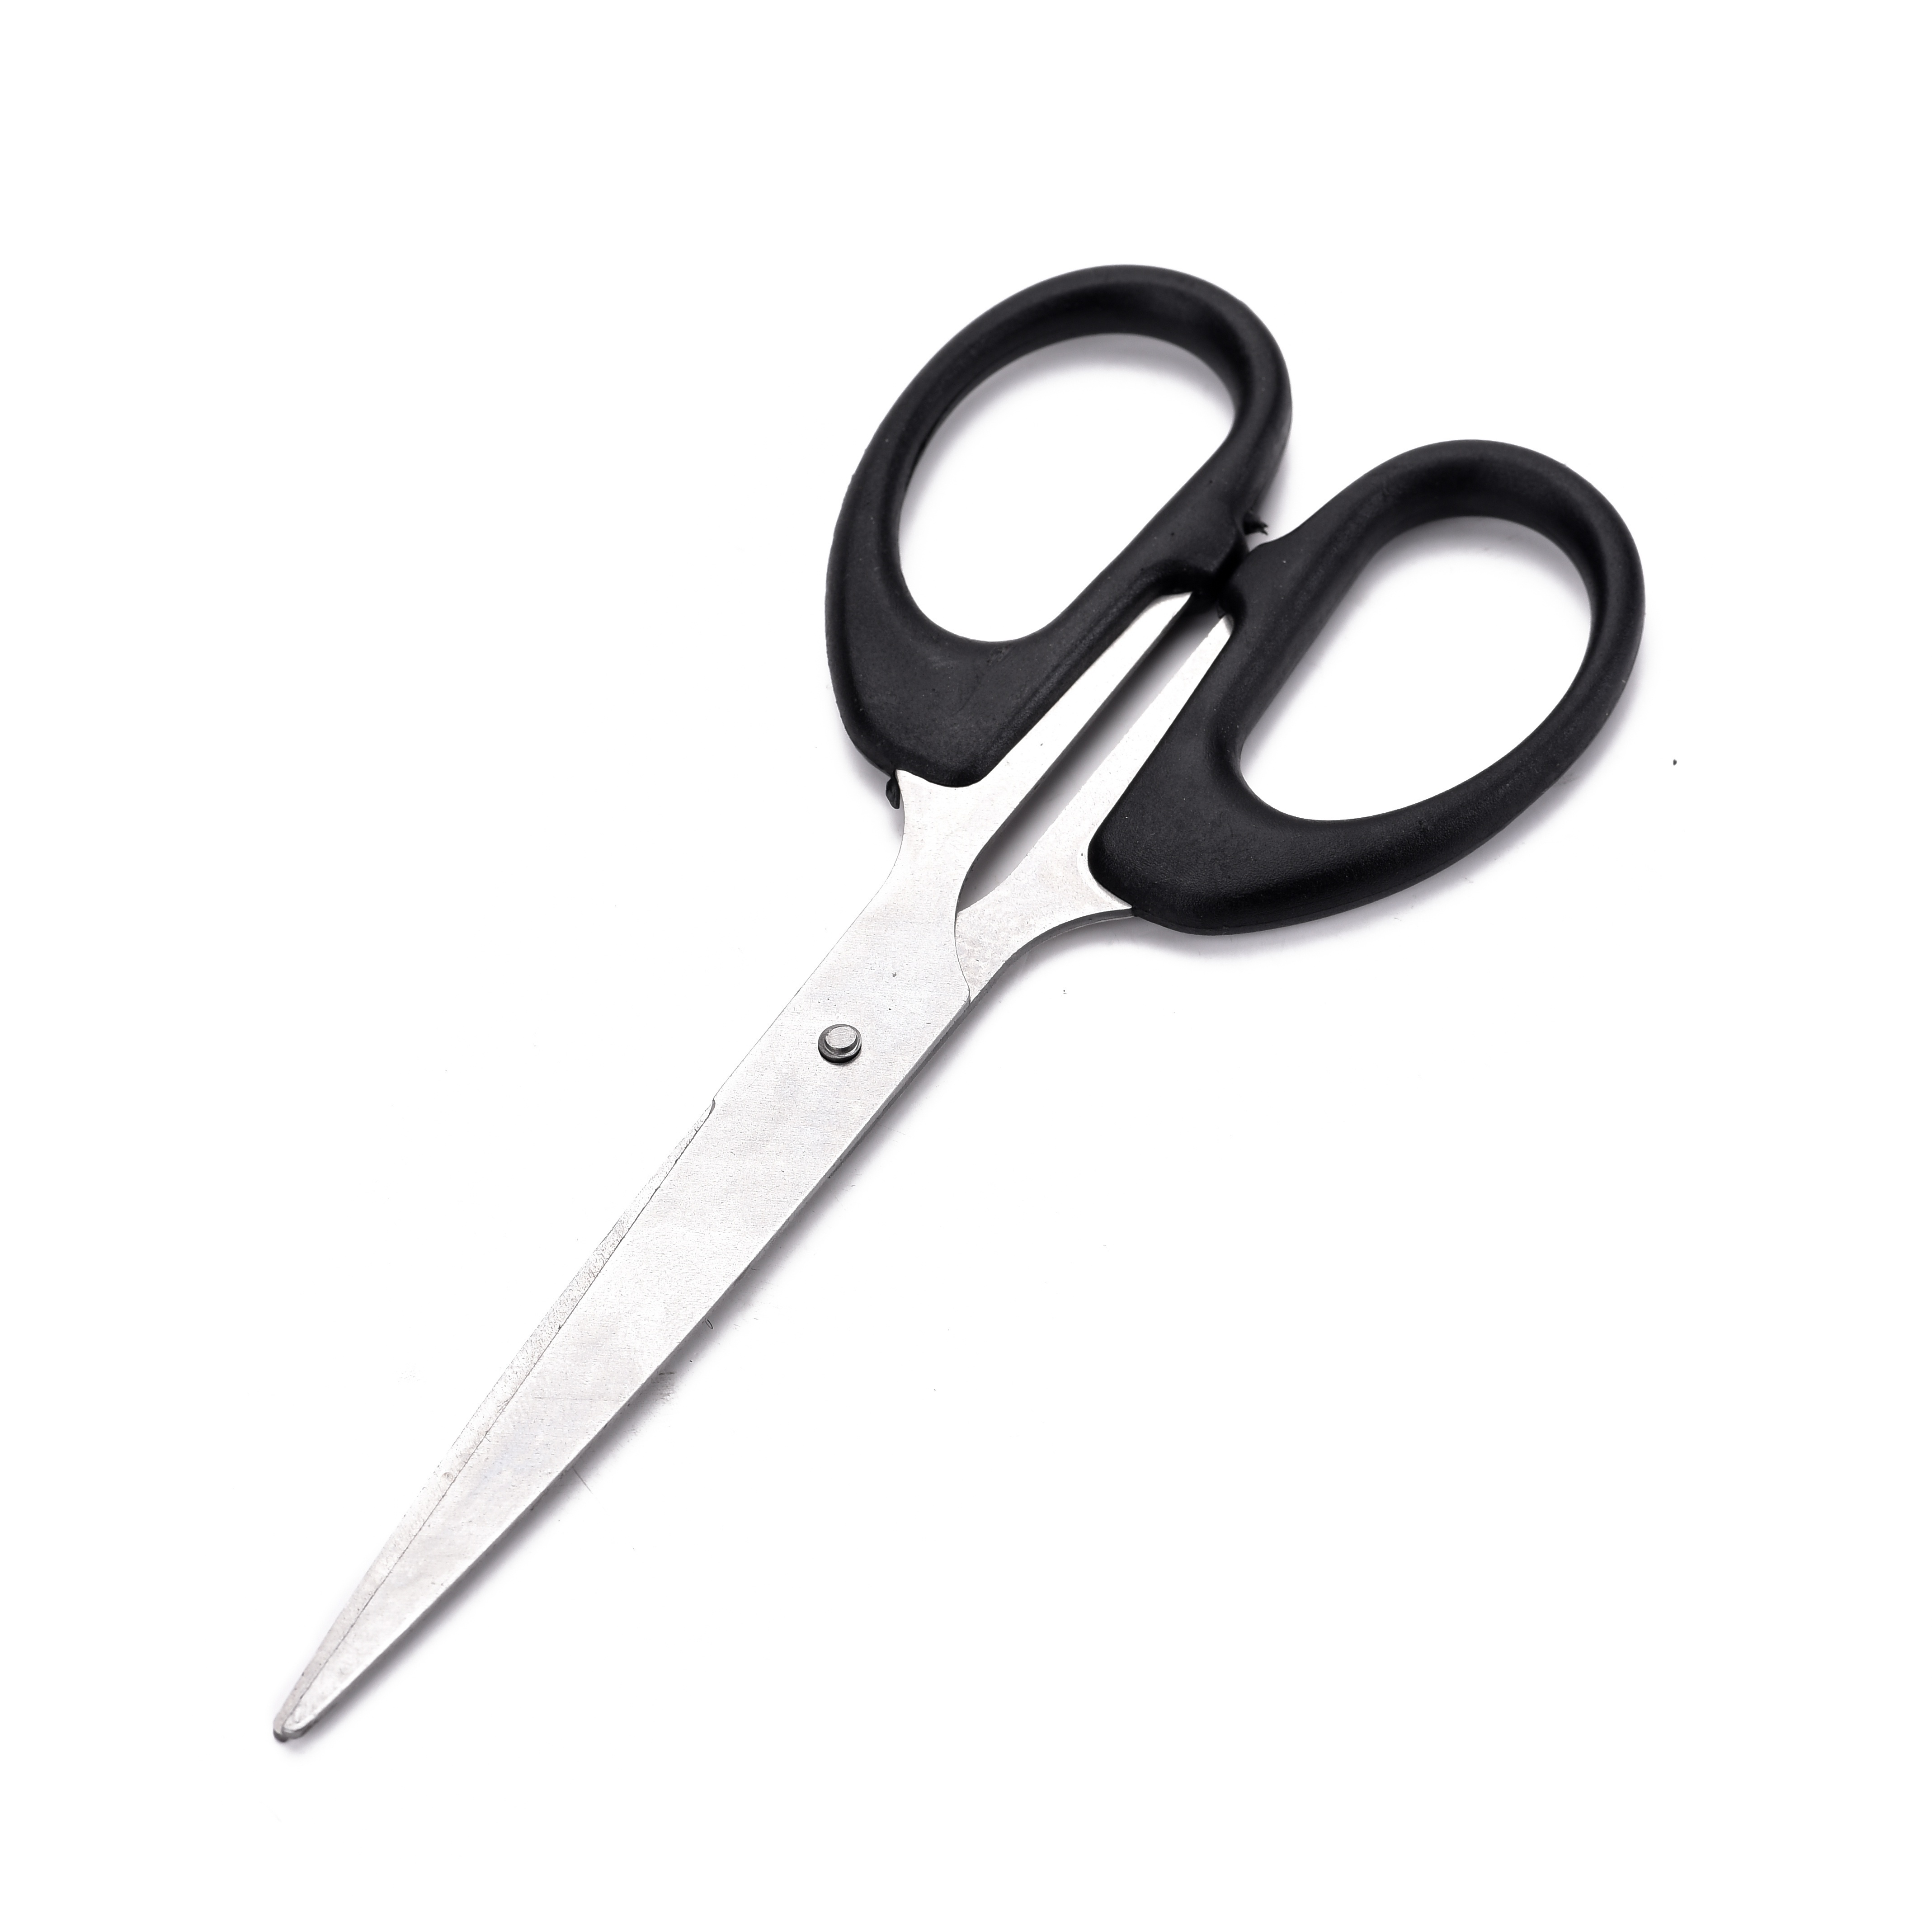  Small Scissors all Purpose, Sharp Mini Detail Craft Scissors  Set with Protective Cover, Precision Straight Fine Tips Design, Ideal for  Paper Cutting, Scrapbooking, Beauty Crafting, Sewing, Red/Purple :  Industrial & Scientific